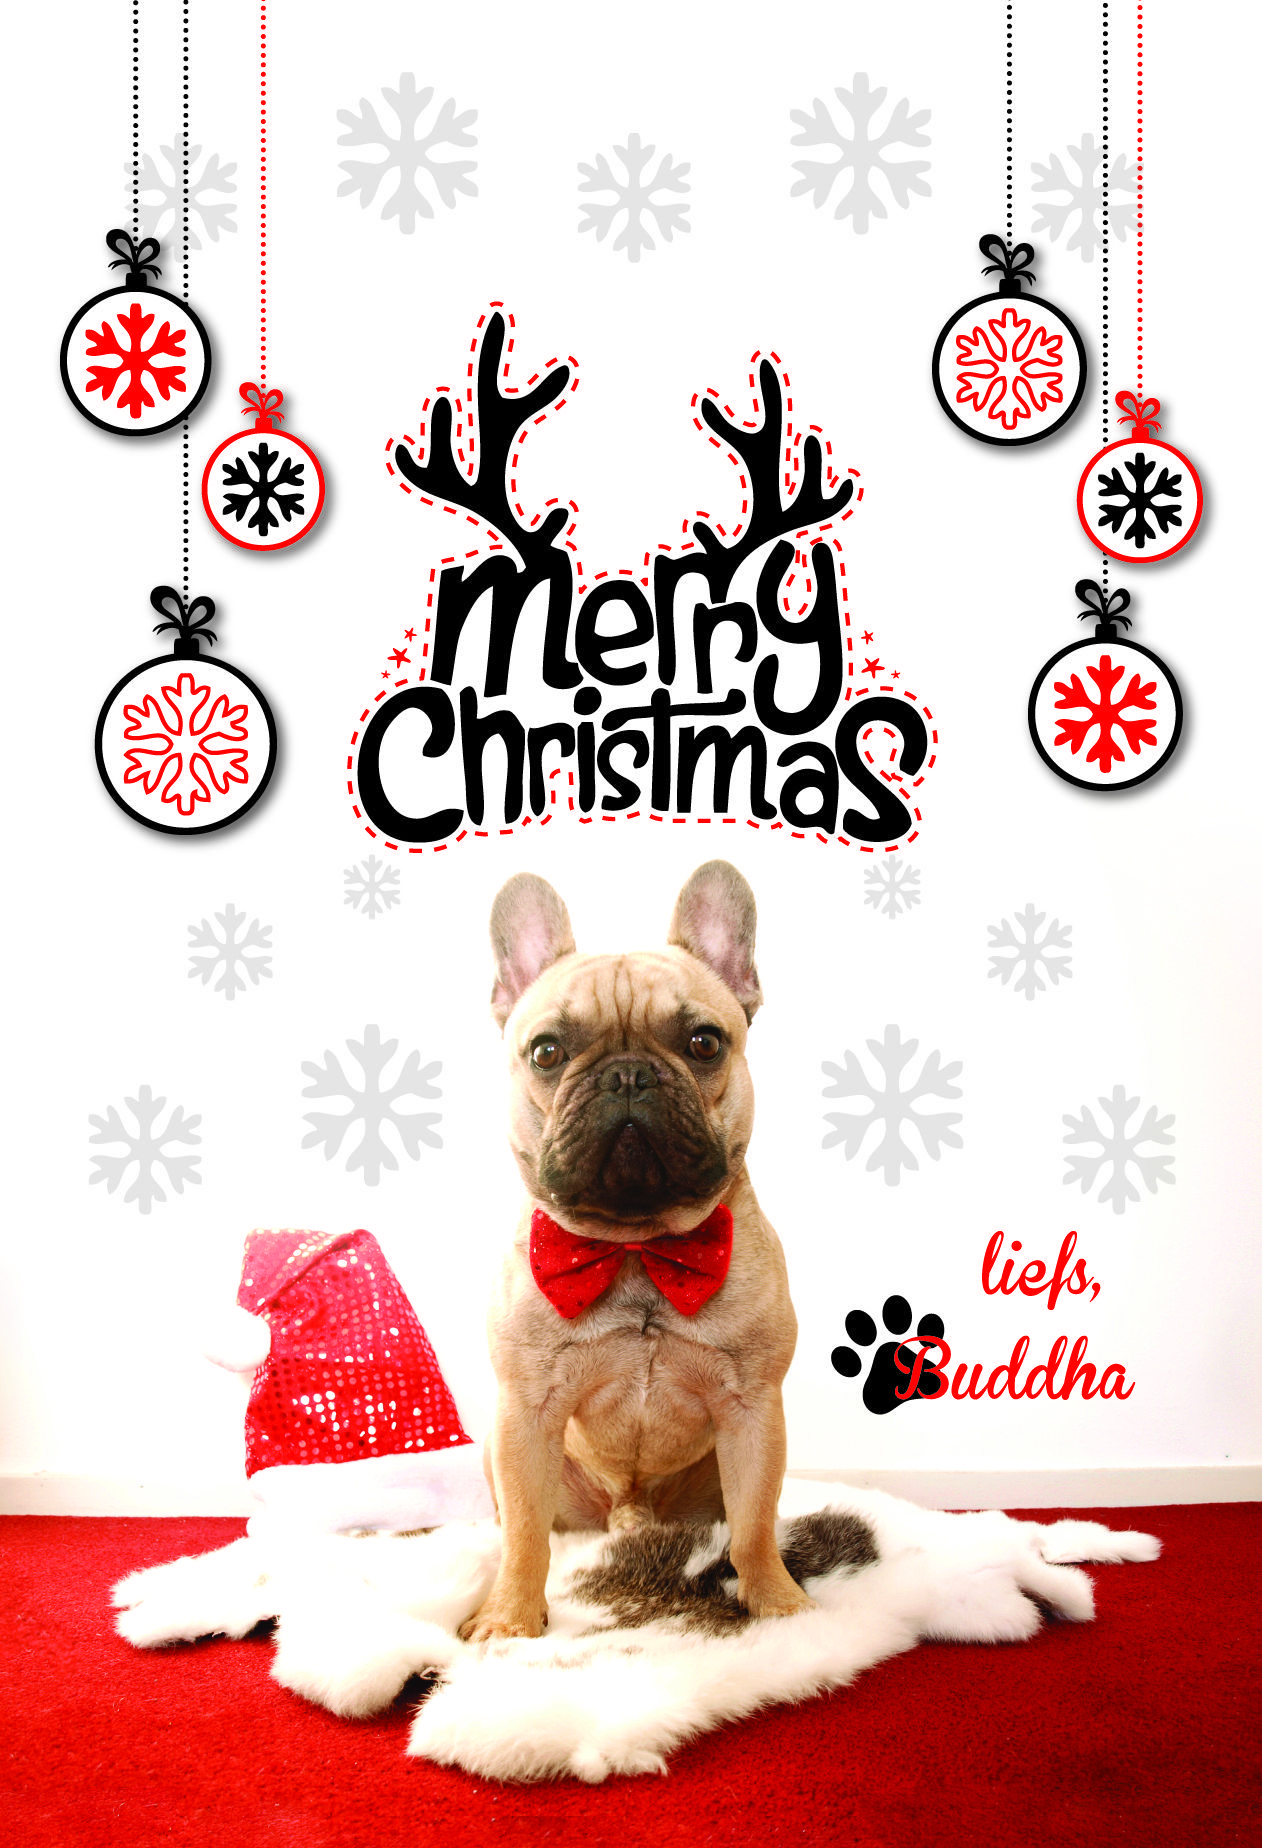 Christmas French Bulldogs Wallpapers - Wallpaper Cave